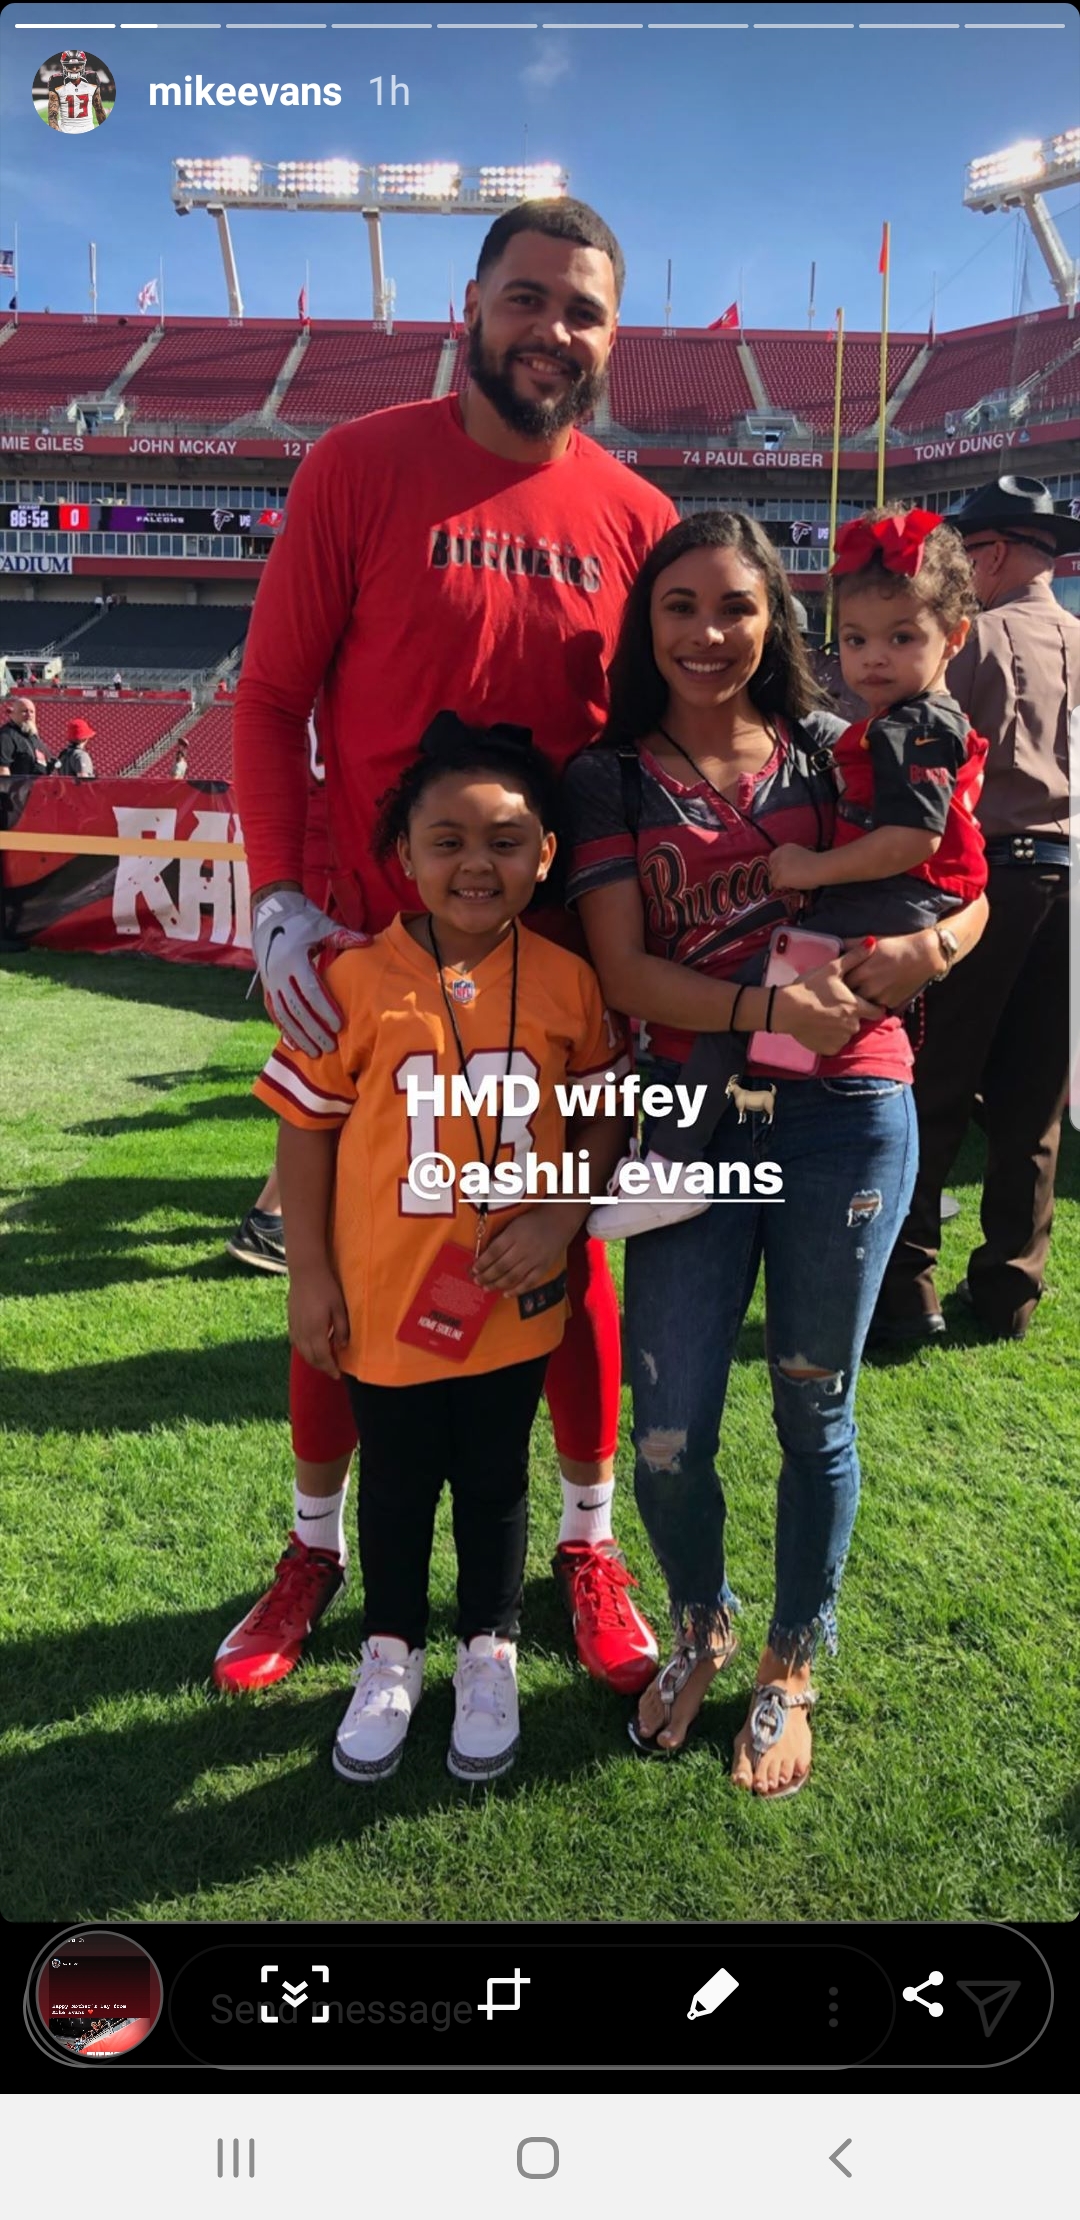 Mike Evans wishes a happy Mother's Day to these special moms